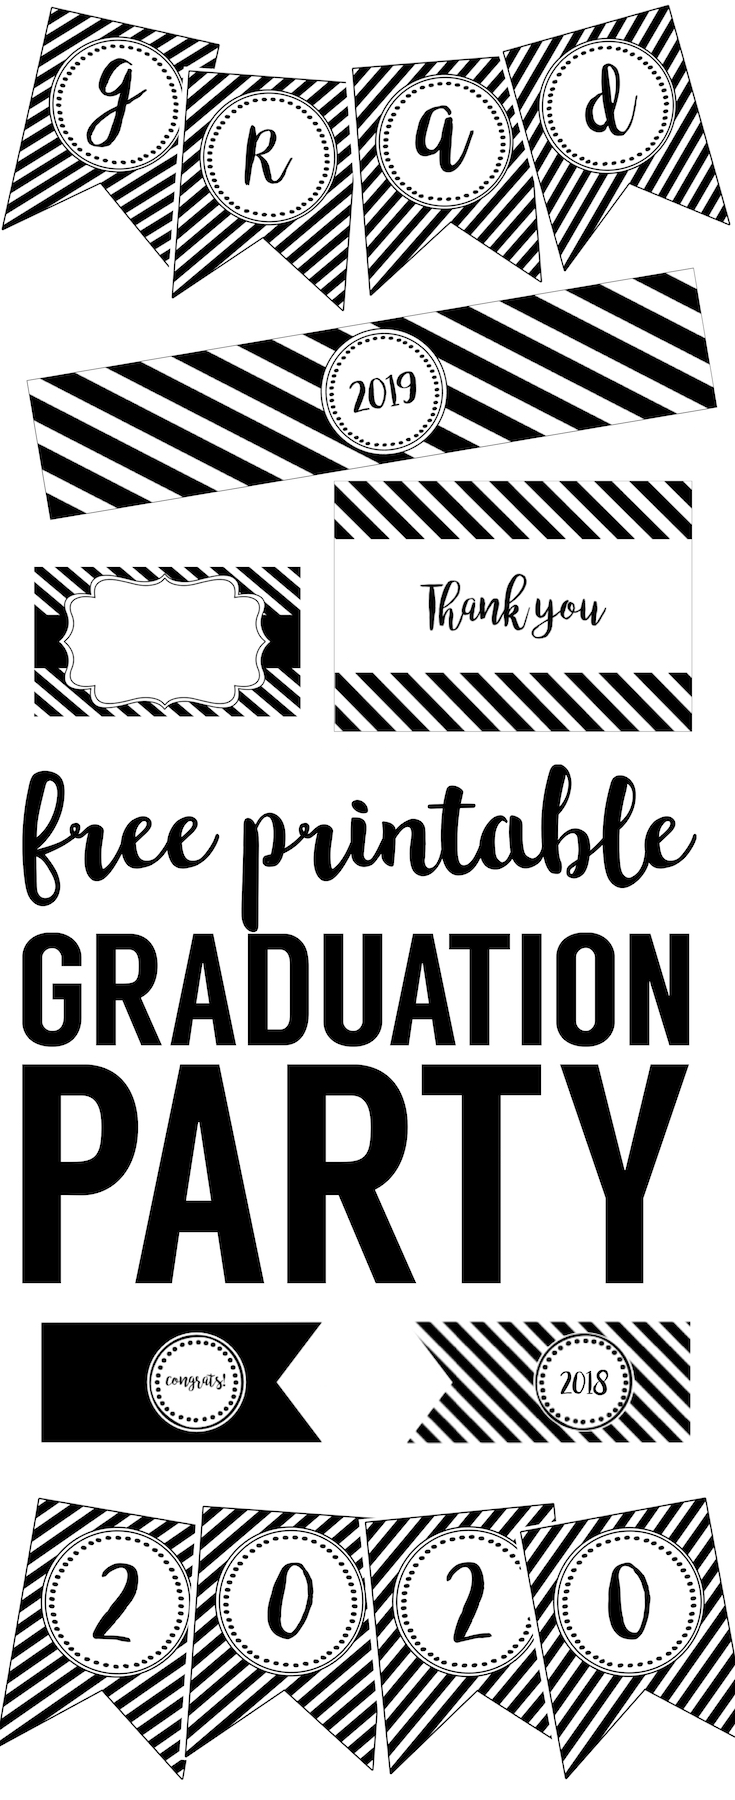 Graduation Party free printables. Printables for 2017, 2018, 2019, & 2020! Everything you need to throw an inexpensive easy DIY graduation party. Banner, water bottle wrappers, food labels, cupcake toppers. 